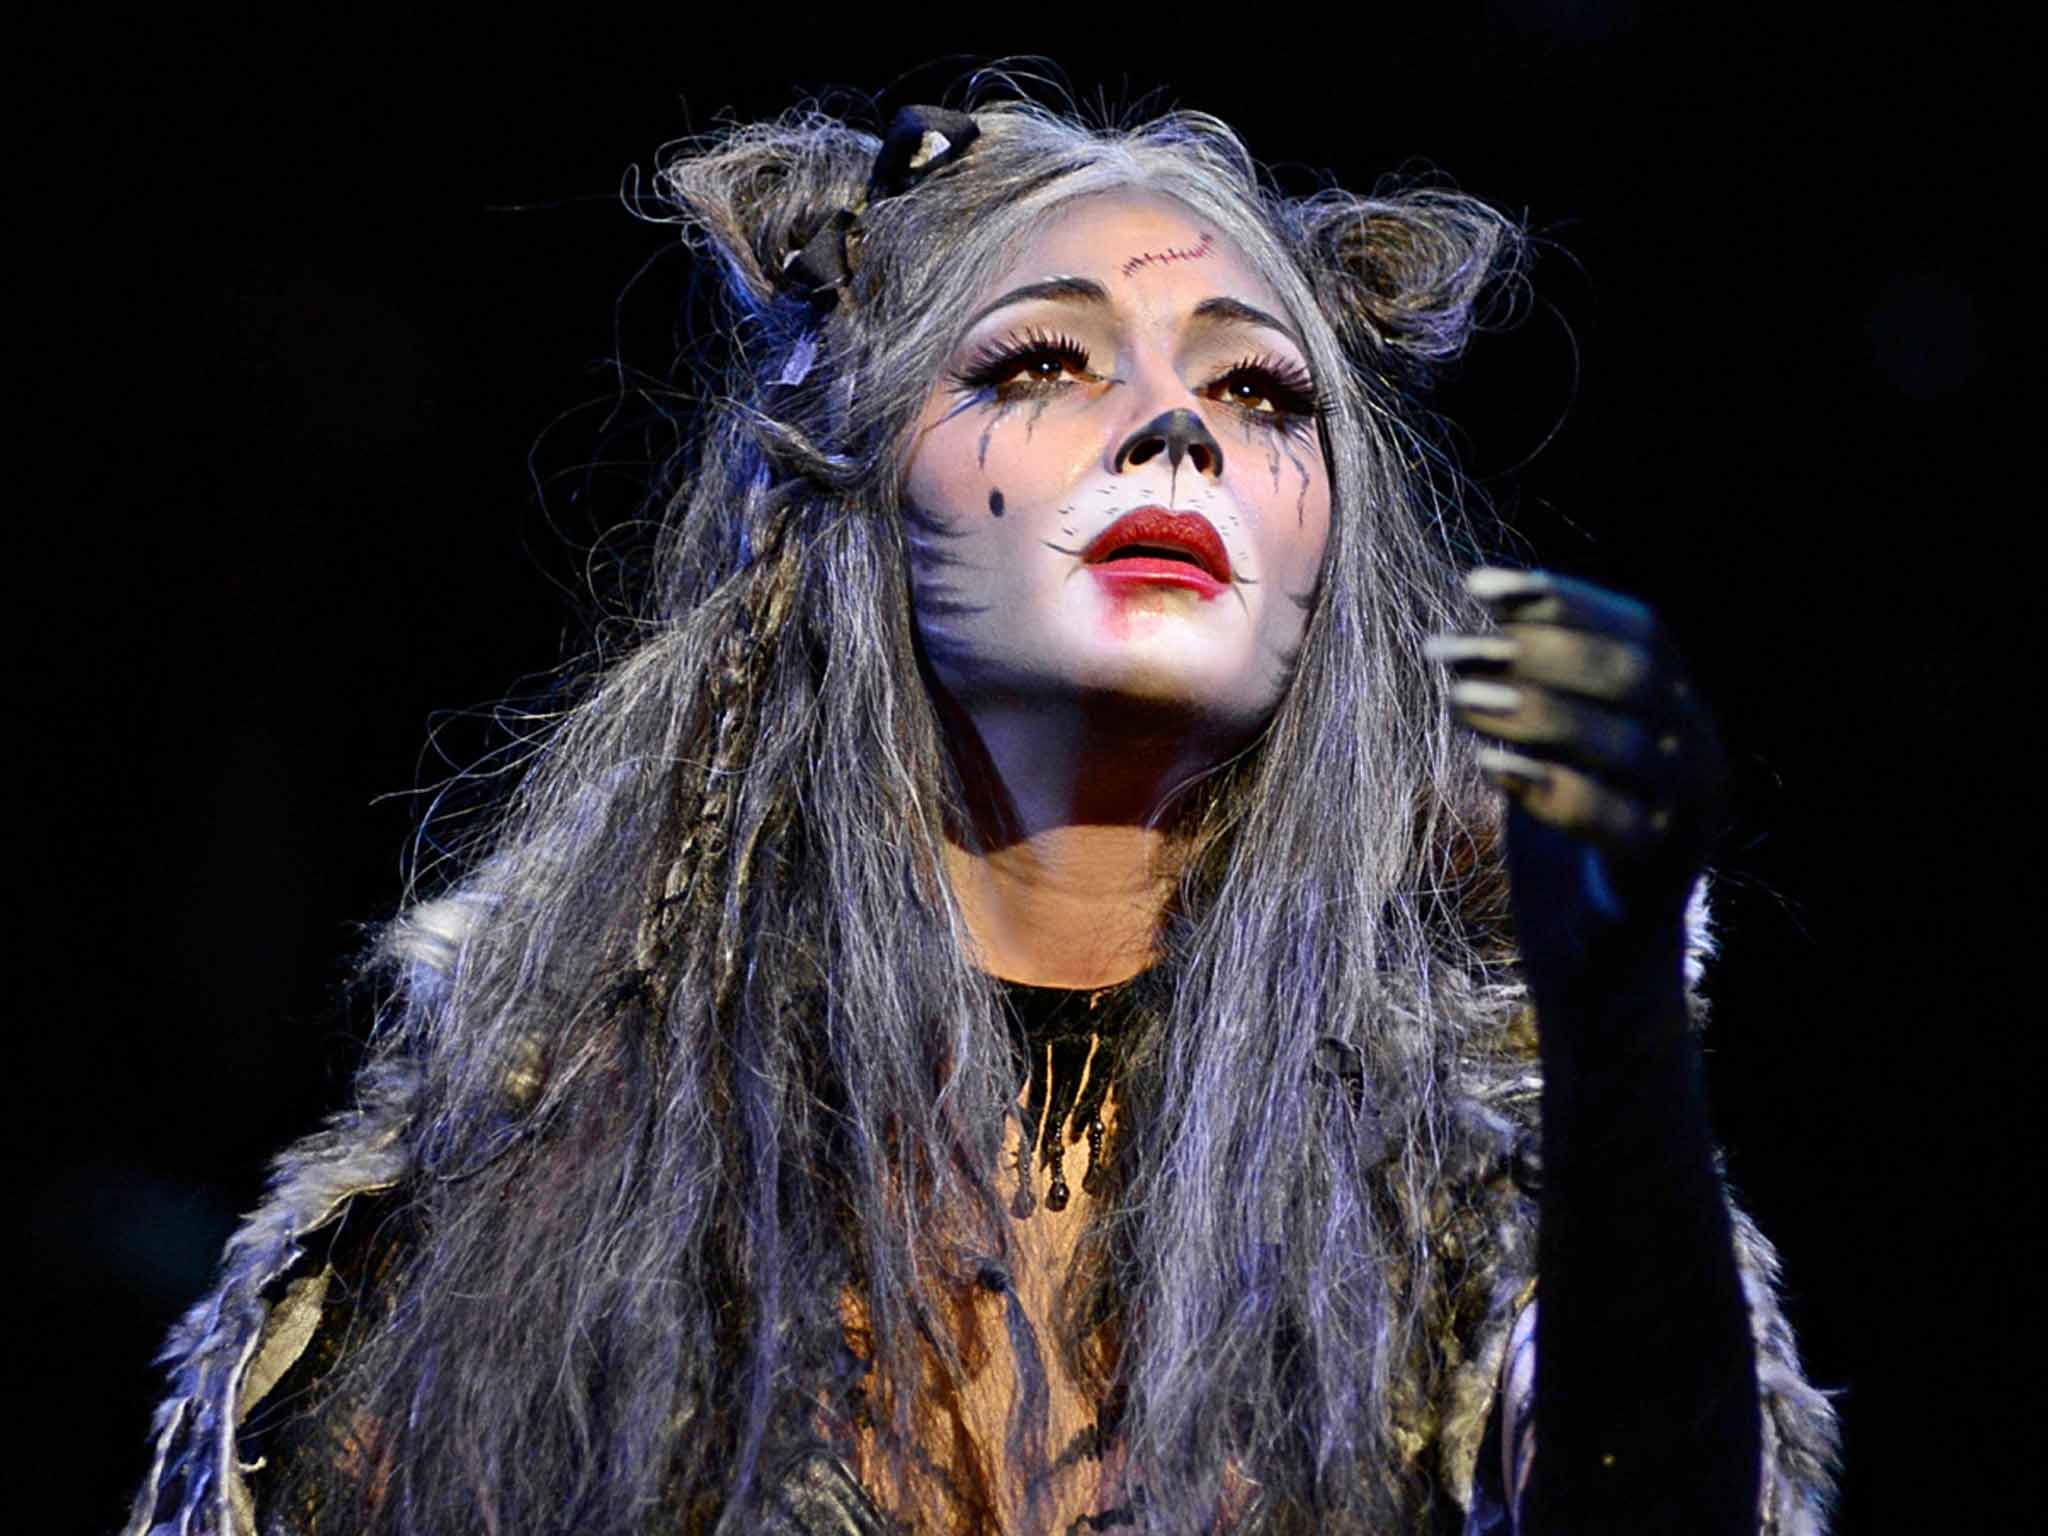 Purrfect: Nicole Sherzinger as Grizabella in the revived 'Cats’. 'A drop-dead stunning presence,' said this newspaper’s reviewer